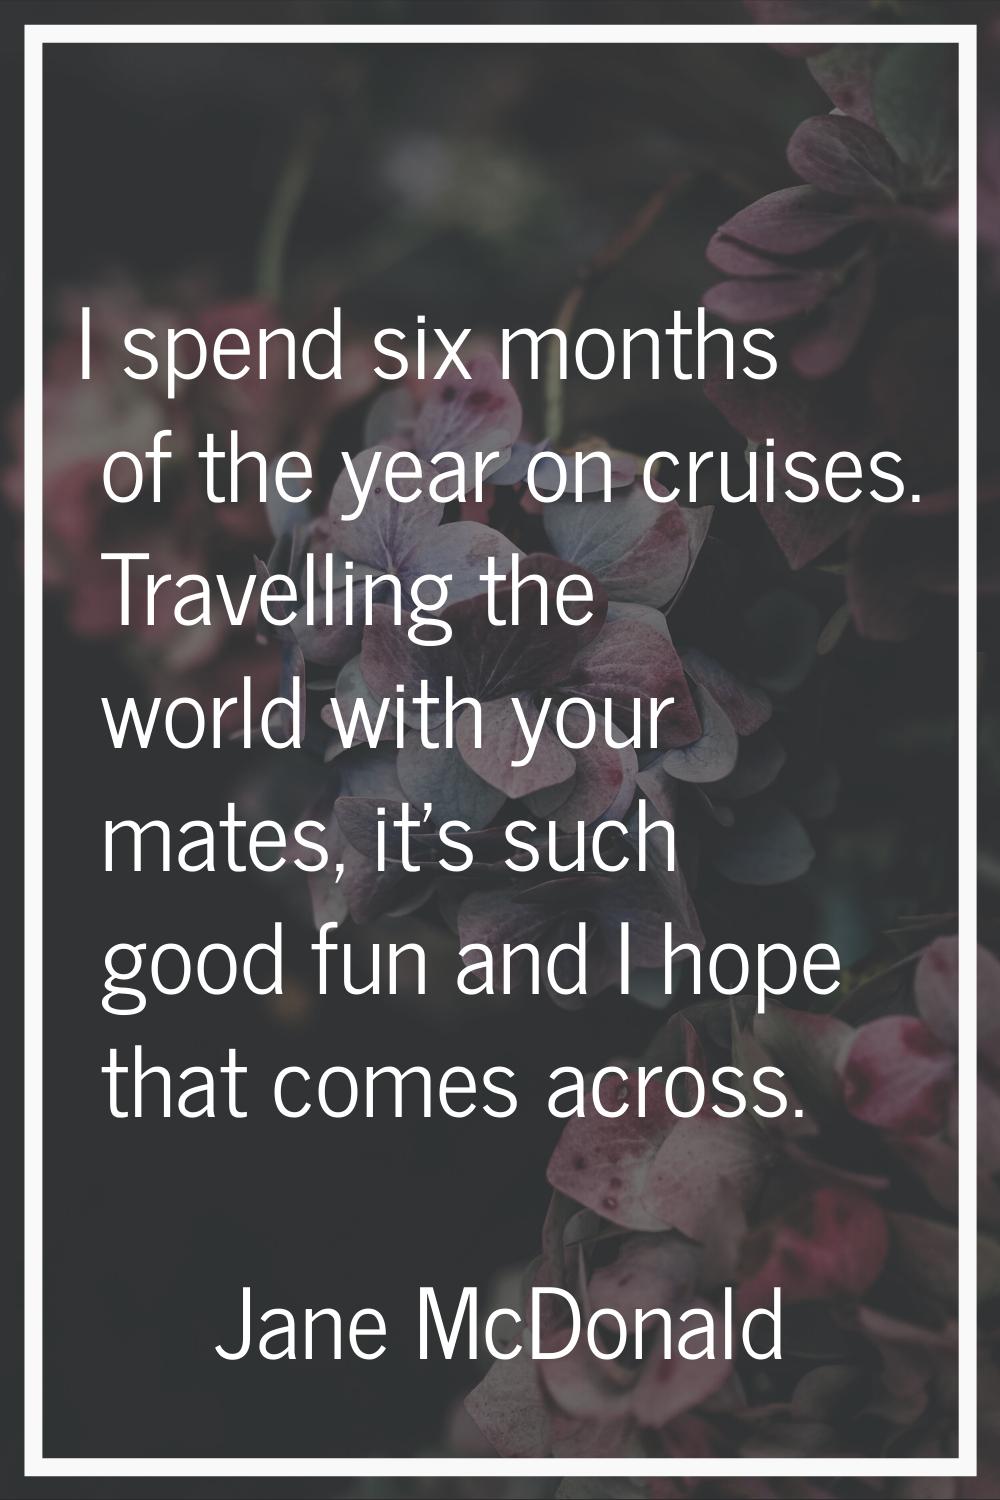 I spend six months of the year on cruises. Travelling the world with your mates, it's such good fun